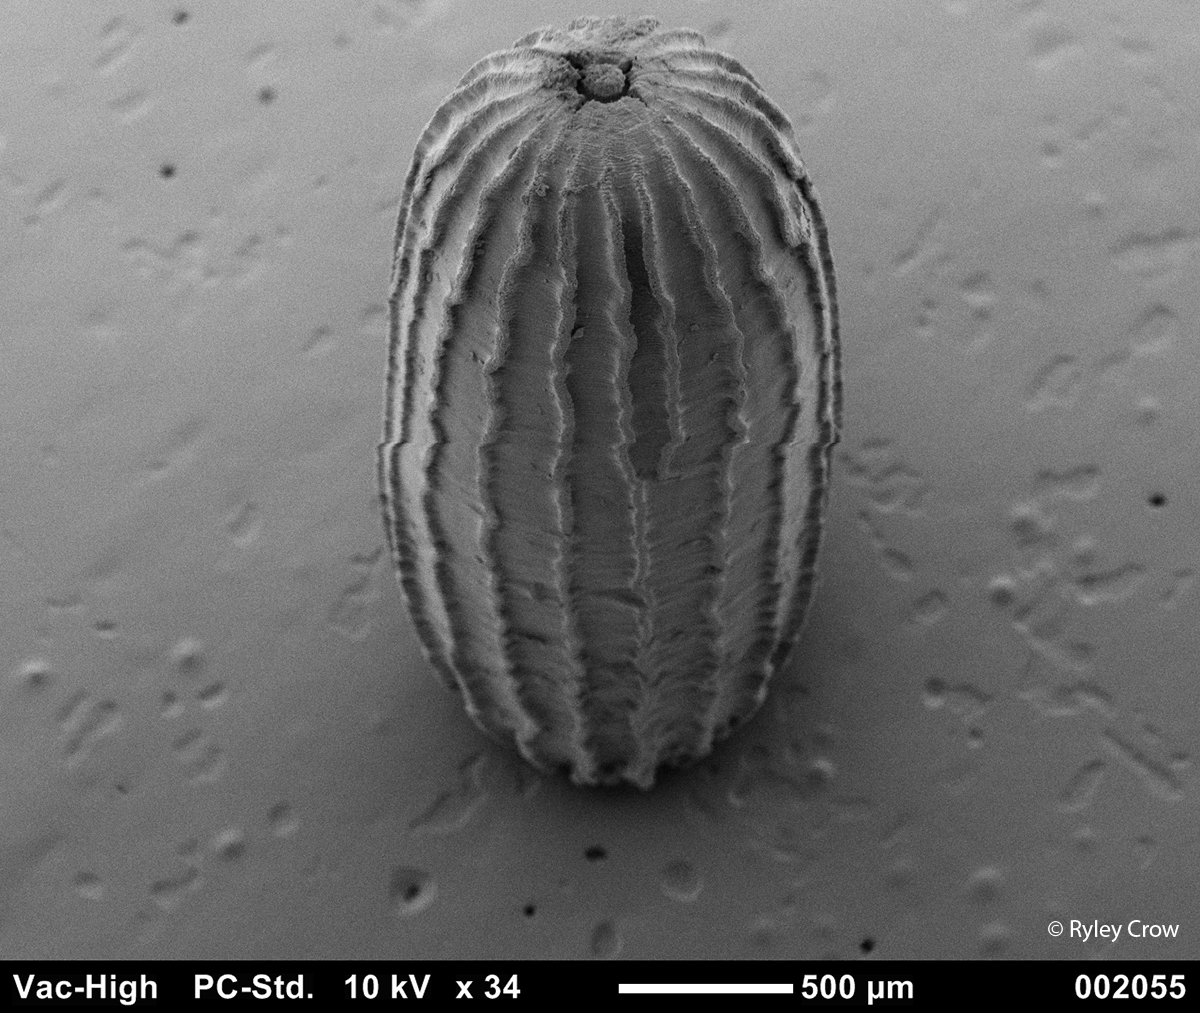 Scanning electron microscope image of an eelgrass seed